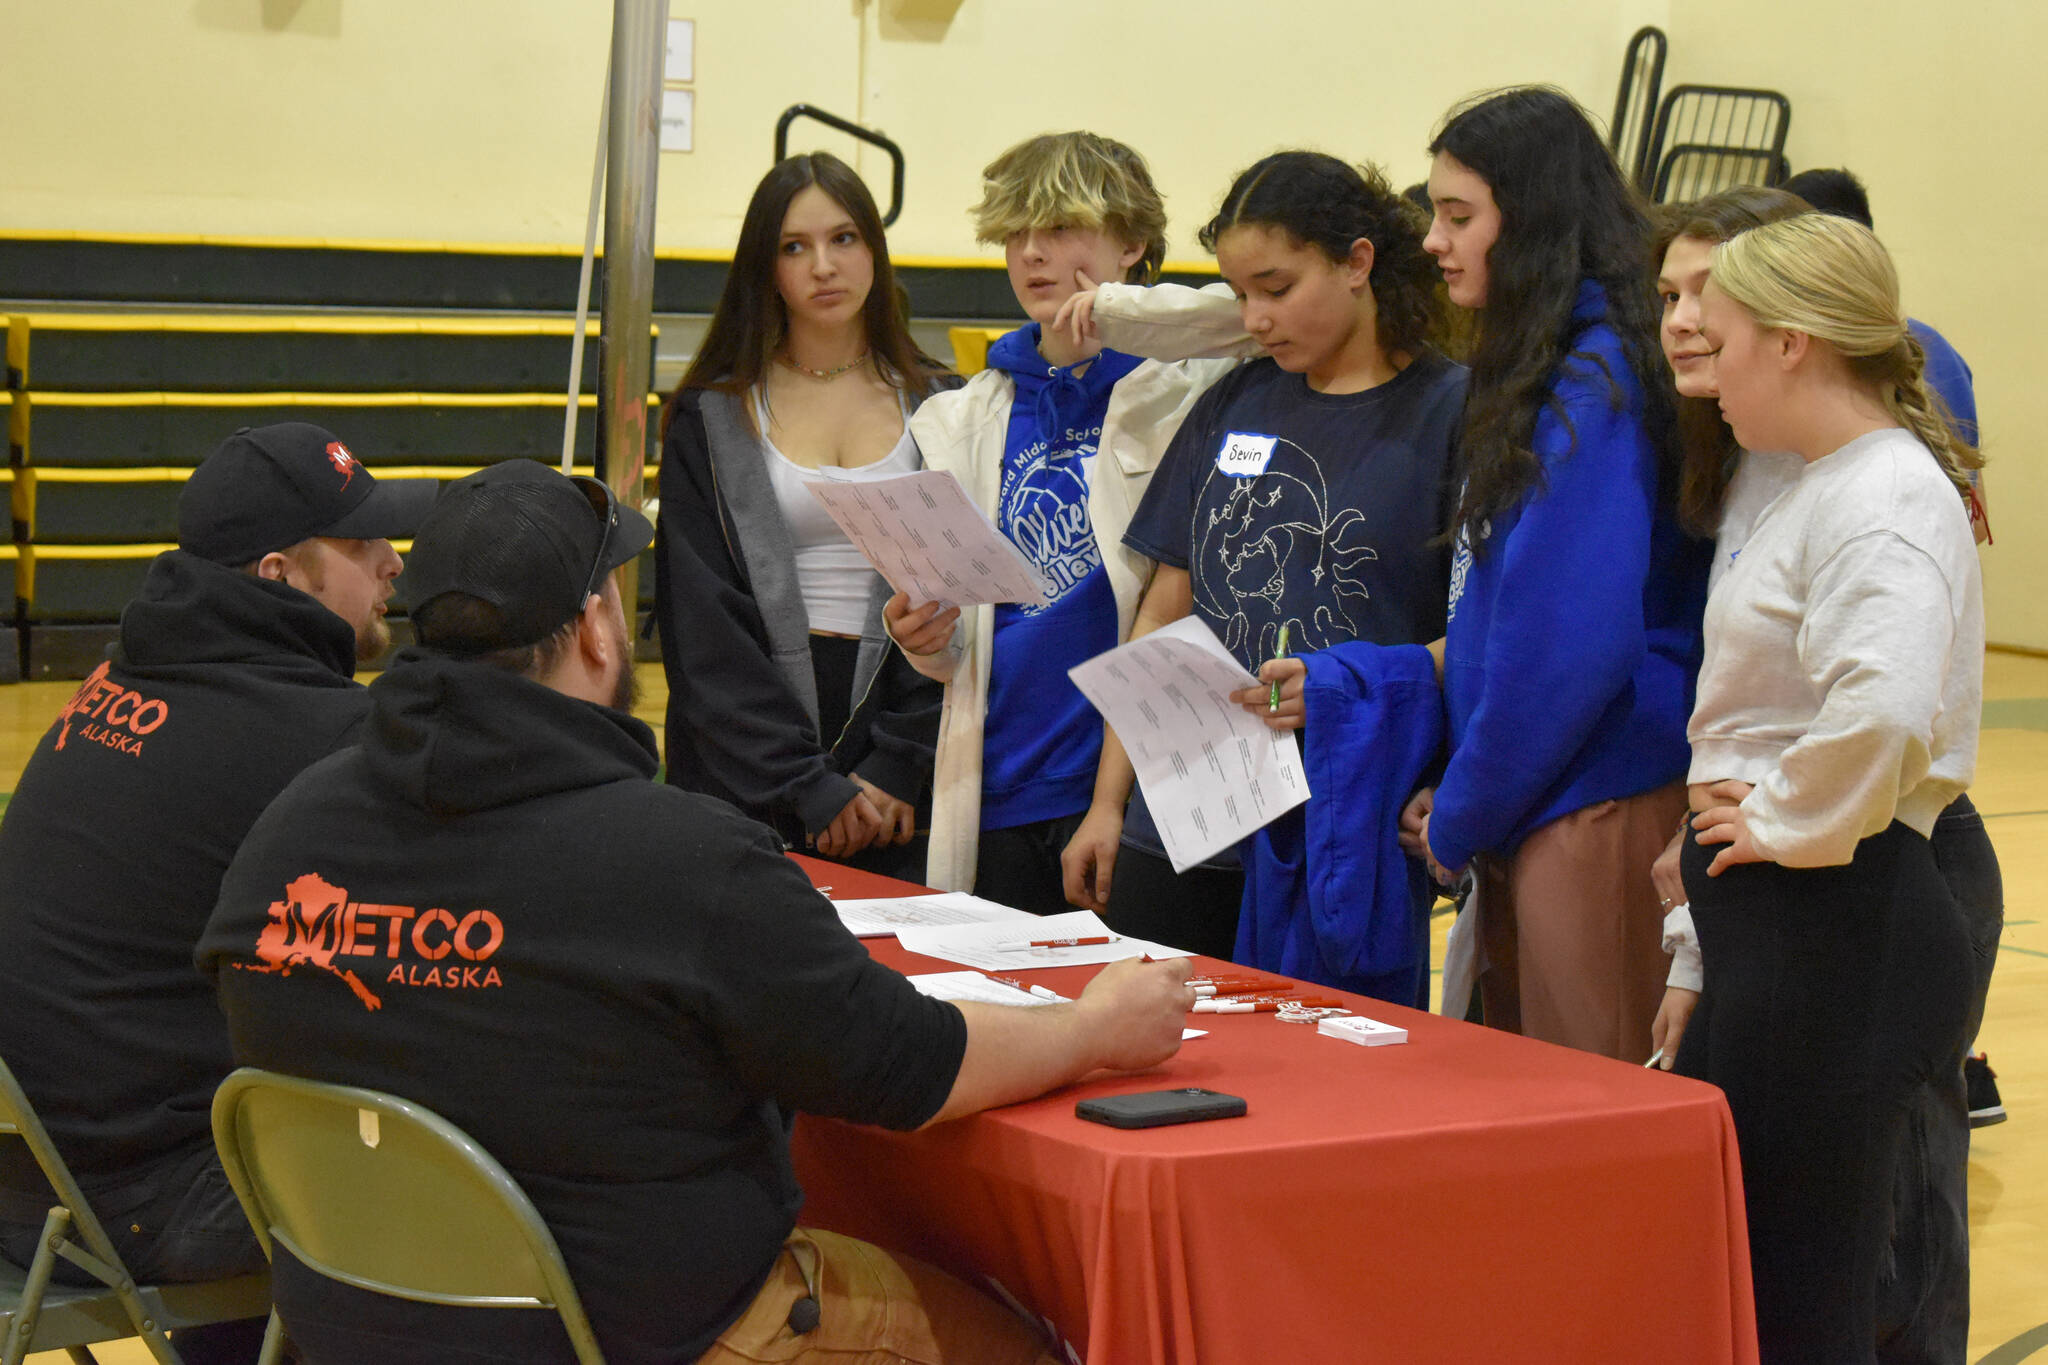 Cole Peterson, of METCO Alaska, talks to a group of students at Seward High School’s Career Day on Thursday, March 23, 2023, at Seward High School in Seward, Alaska. (Jake Dye/Peninsula Clarion)